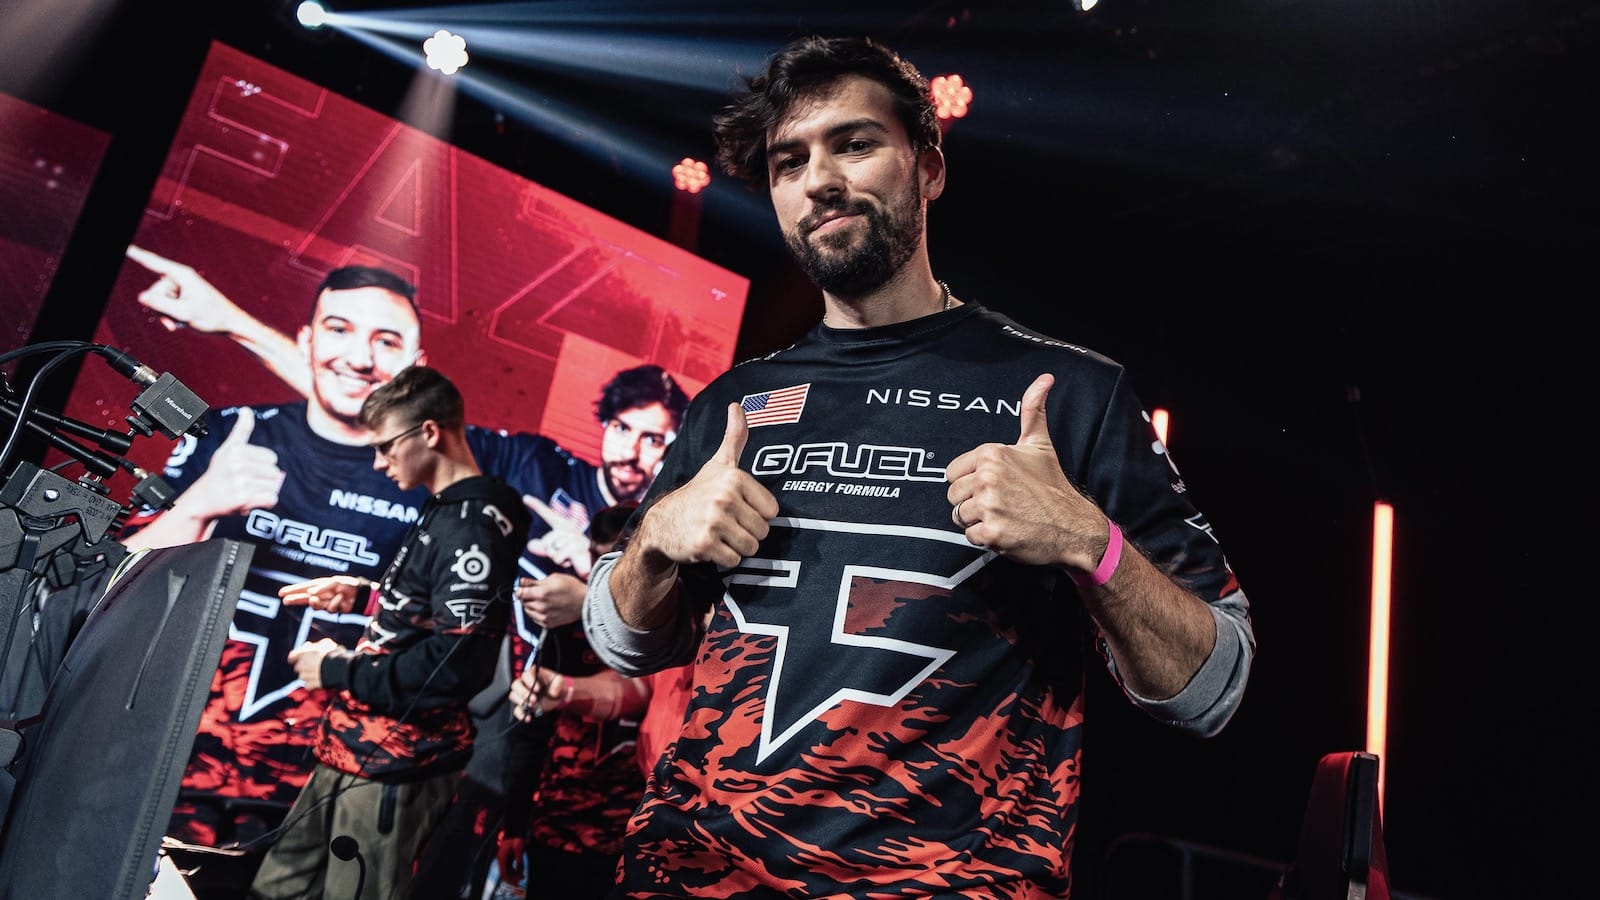 G FUEL - This past weekend saw 10 different FaZe Clan members